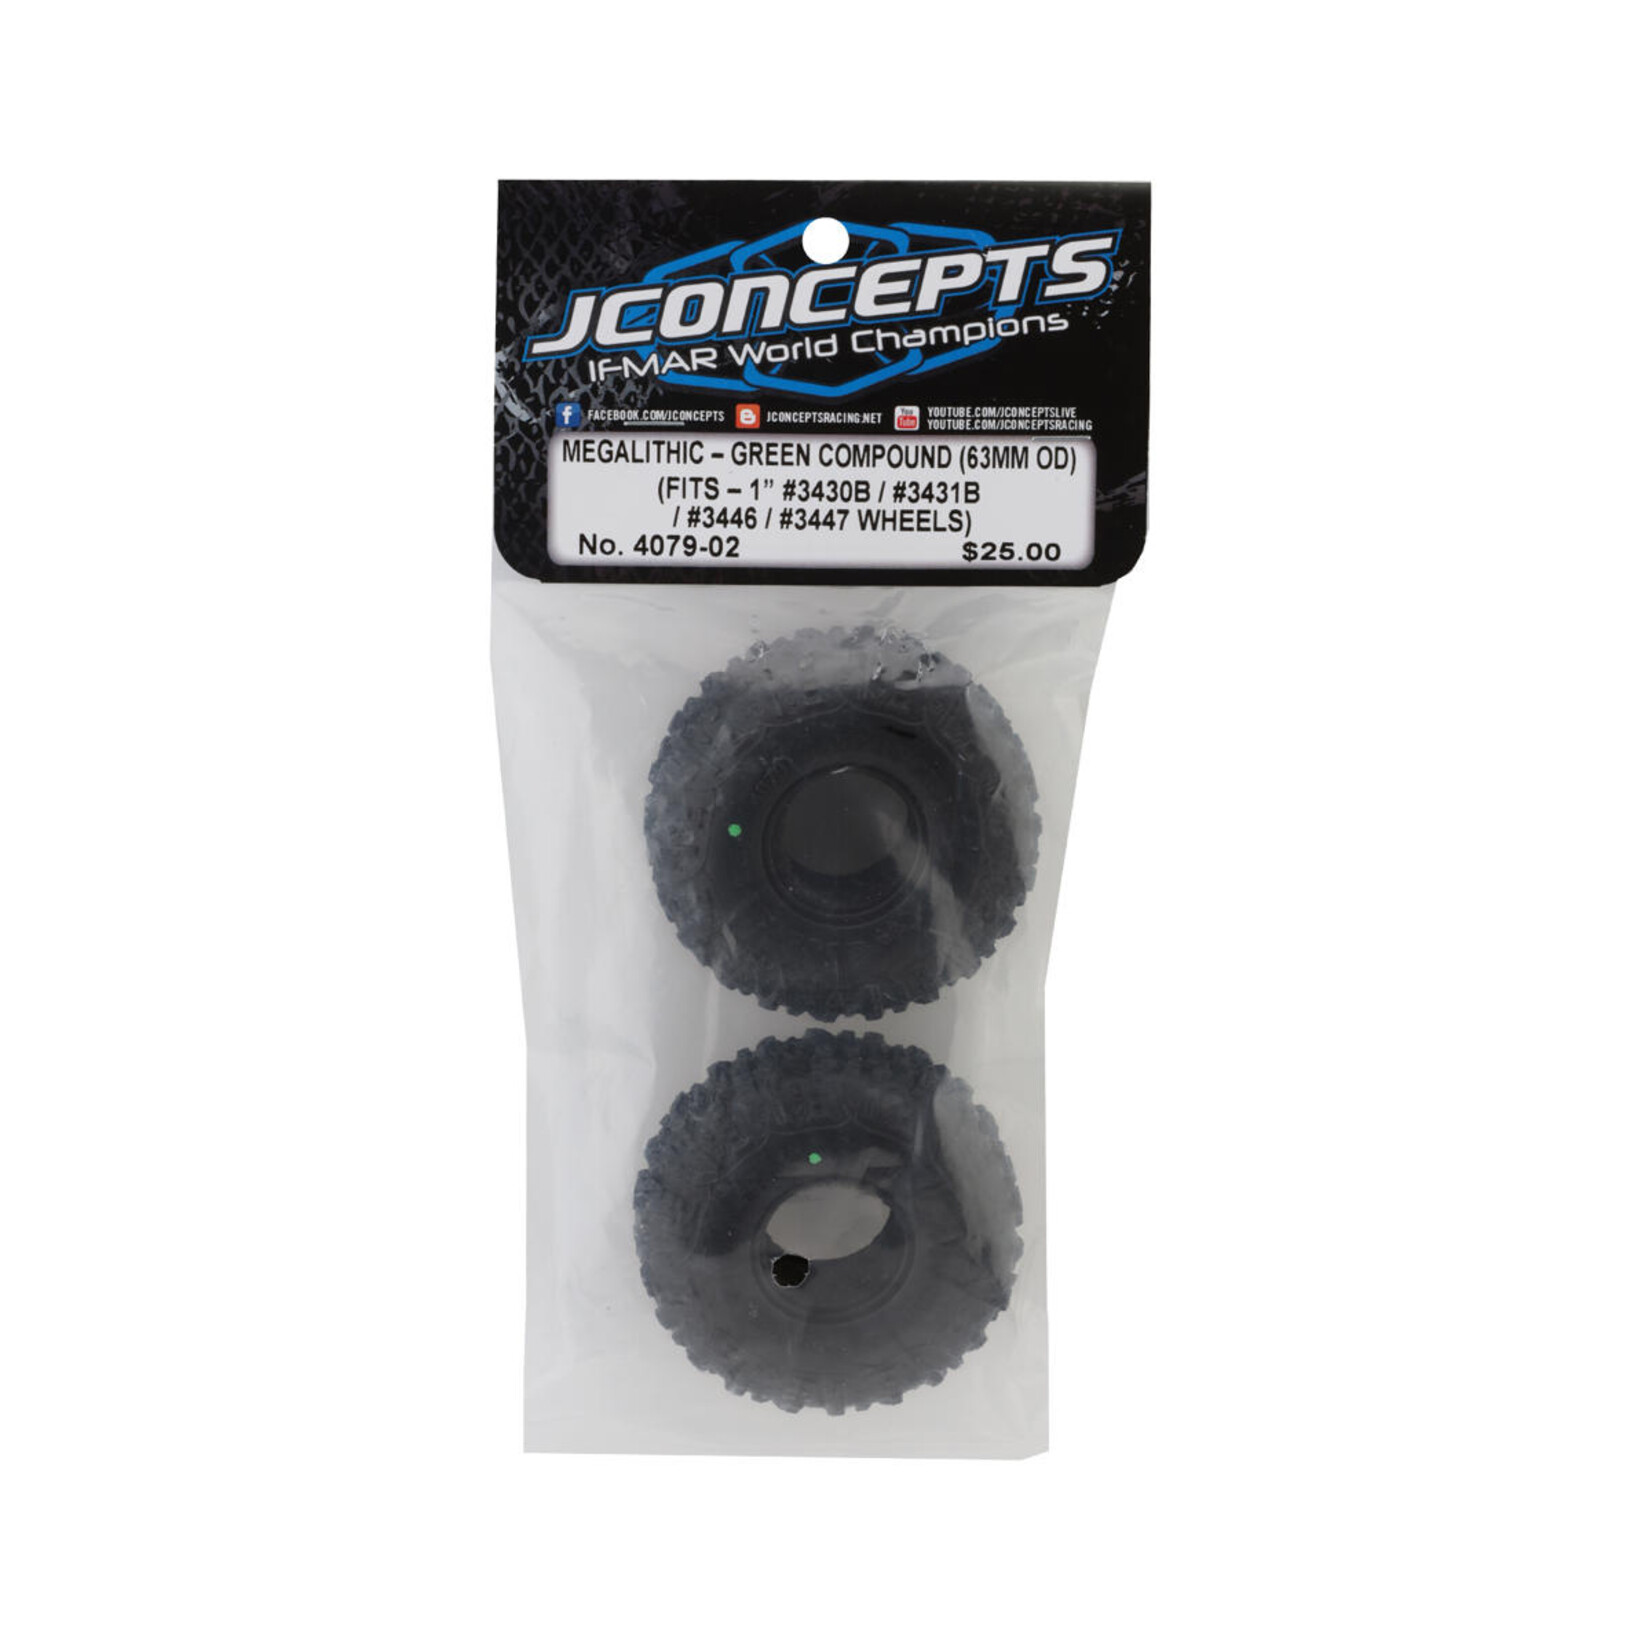 JConcepts JConcepts Megalithic 1.0" Micro Crawler Tires (2) (63mm OD) (Green) #4079-02